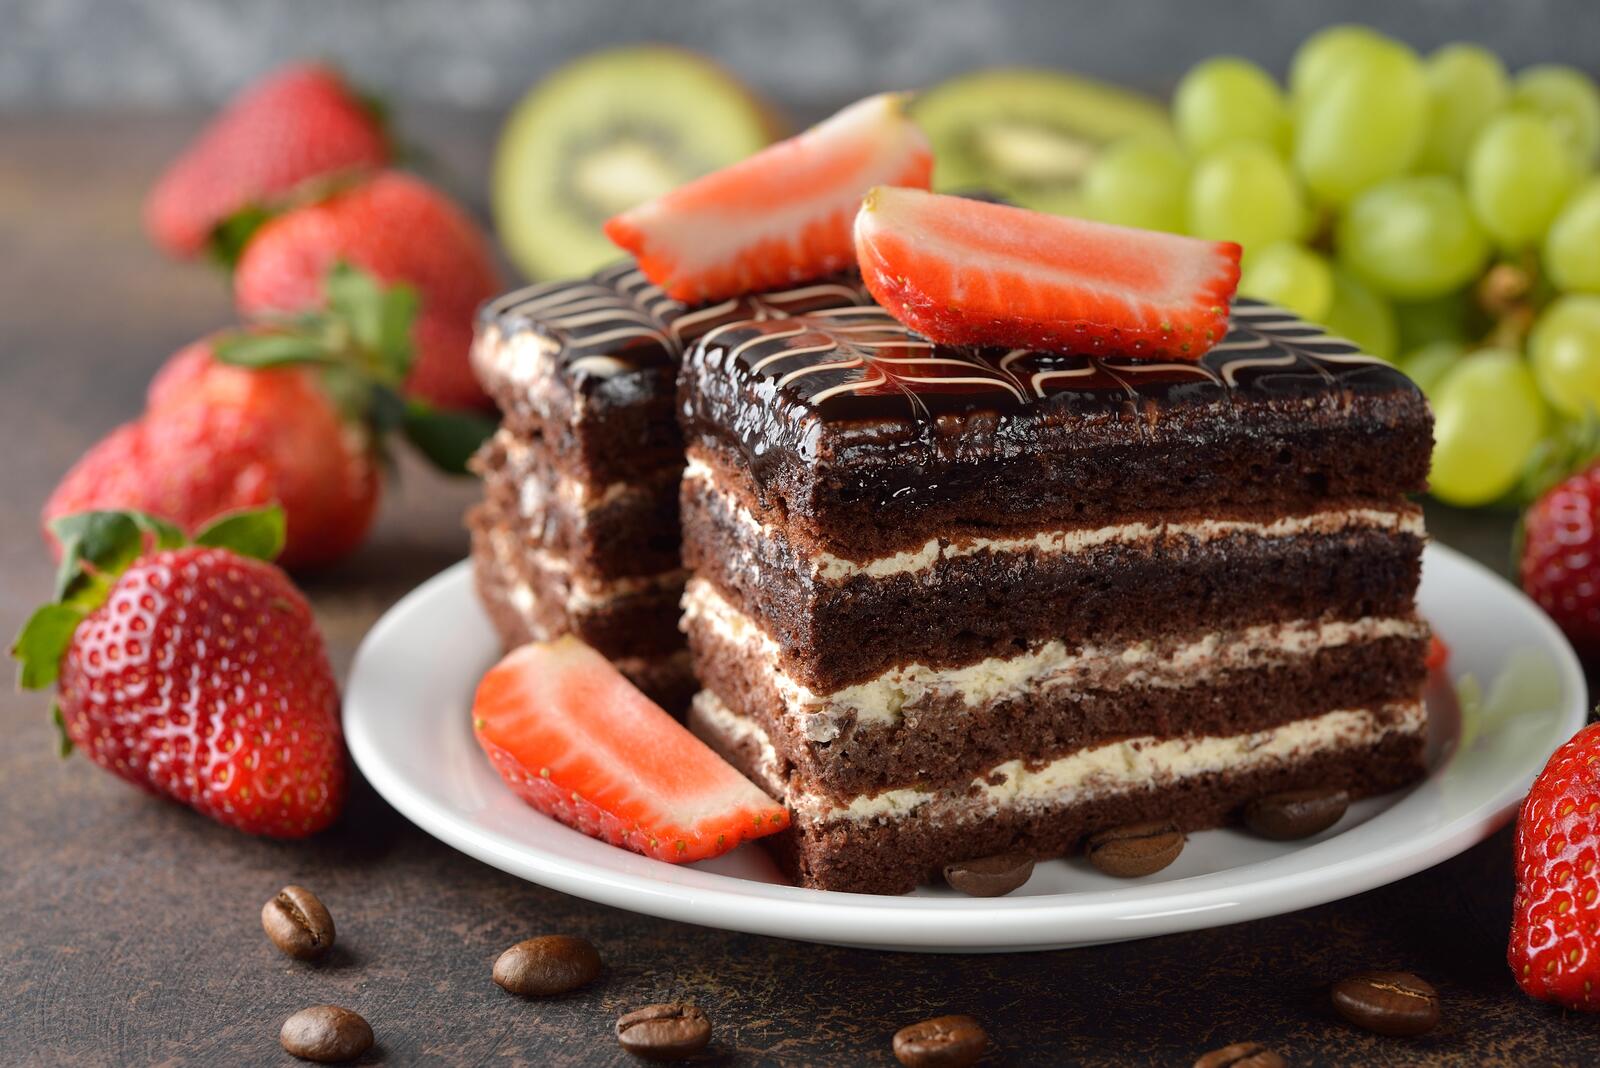 Wallpapers wallpaper chocolate cake strawberry food on the desktop